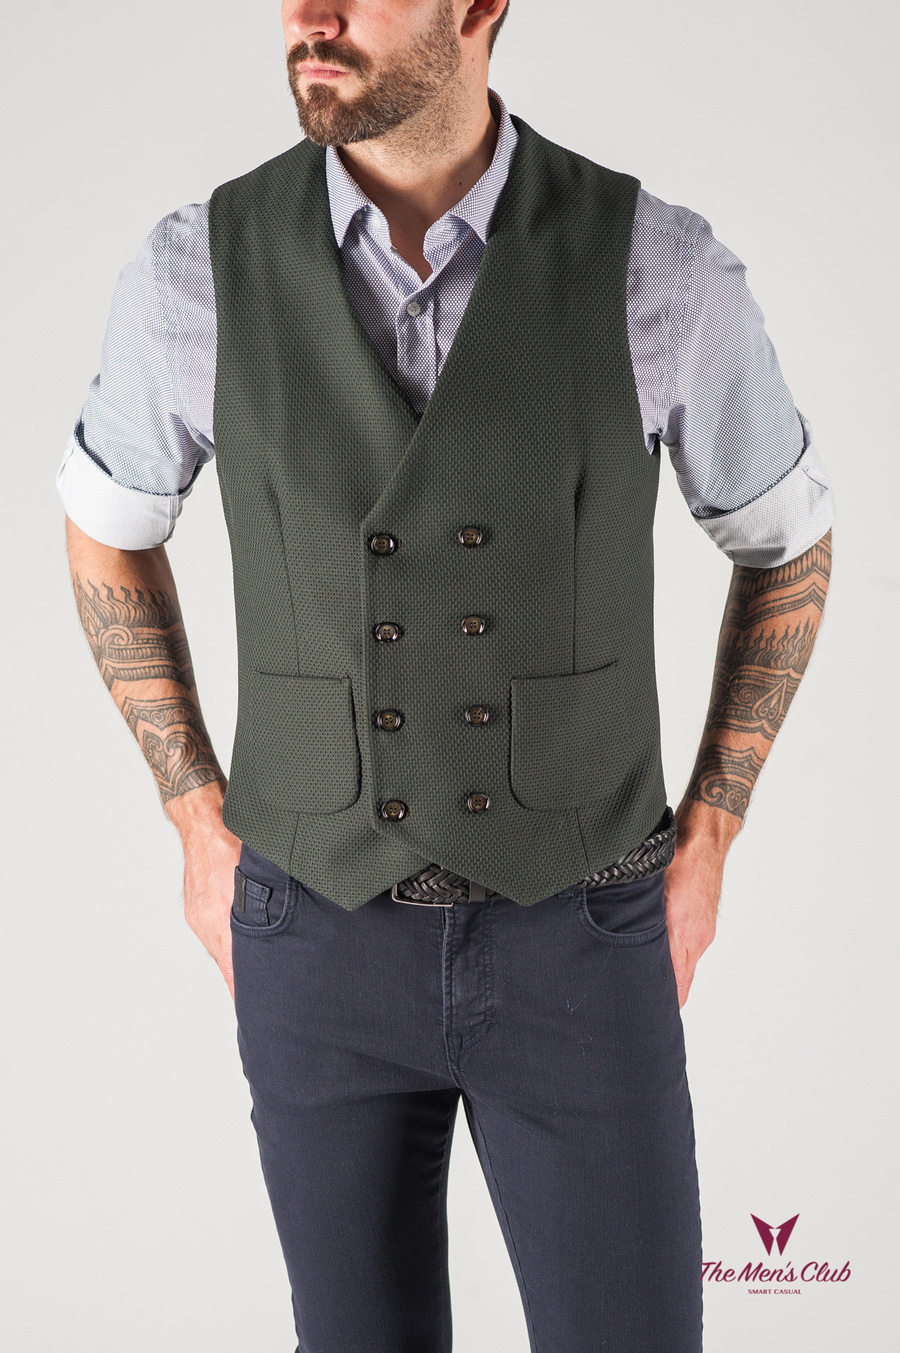 Green vest for boys squeeze out definition